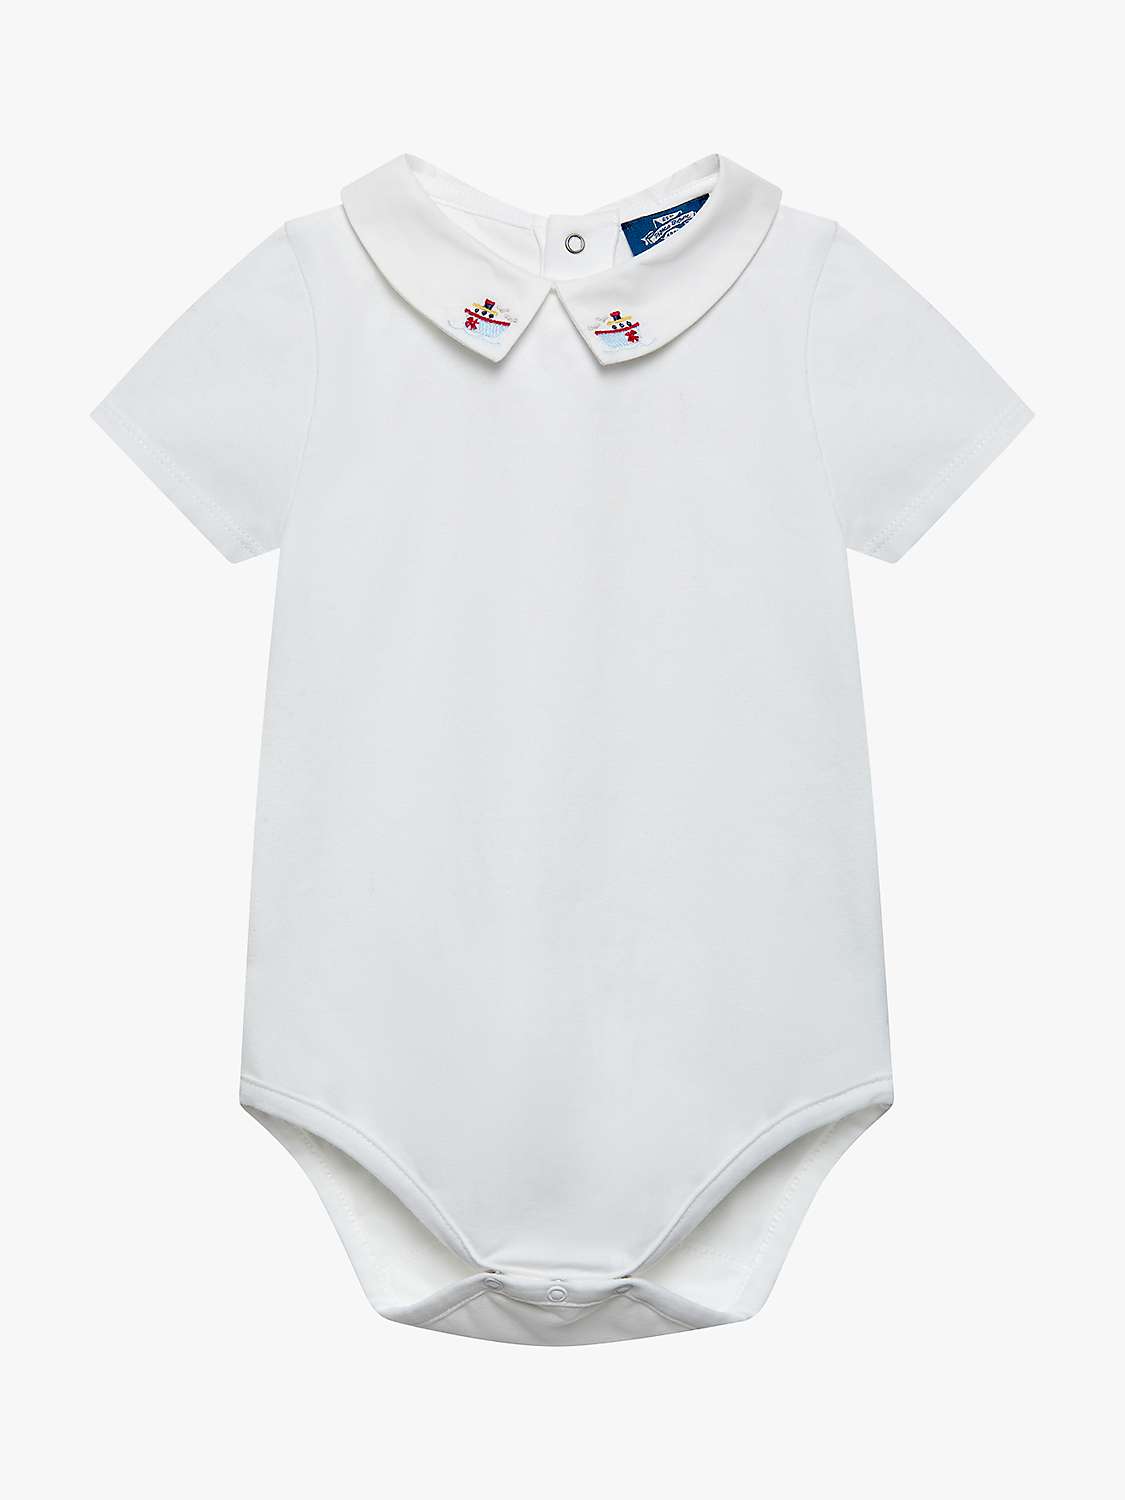 Buy Trotters Baby Monty Tugboat Jersey Bodysuit, White Online at johnlewis.com